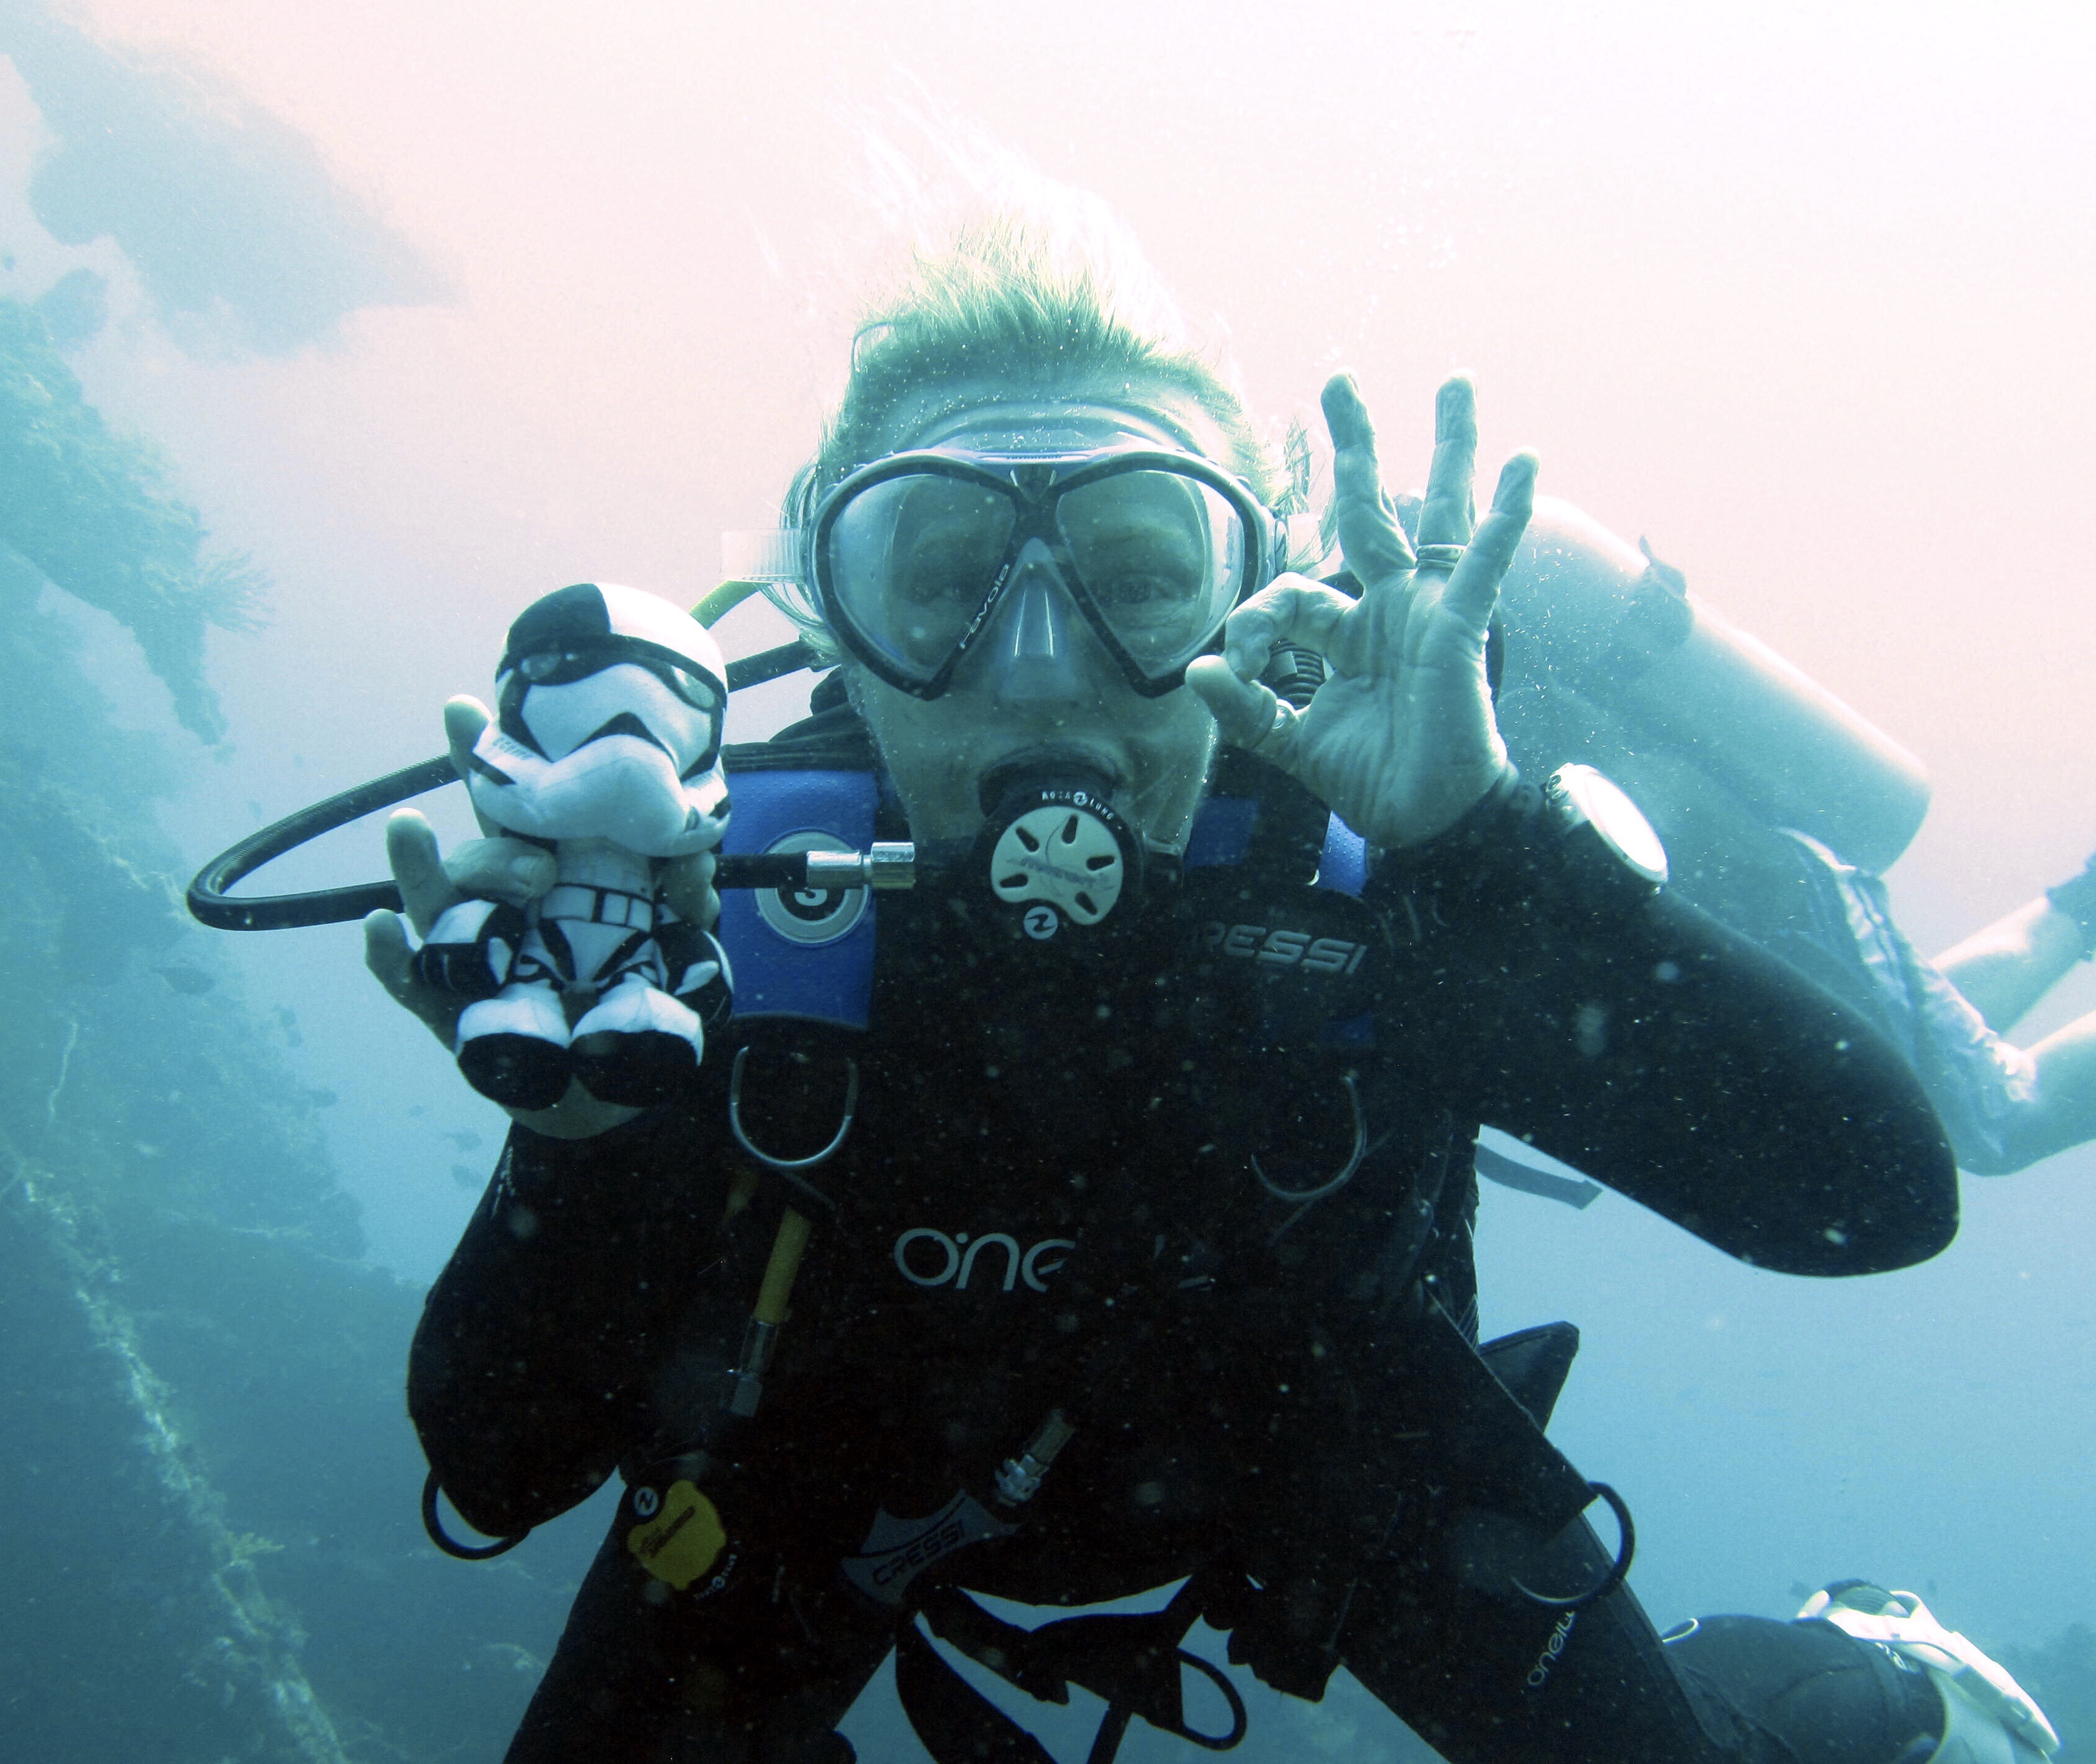 Emma and the stormtrooper scuba diving on the USAT Liberty shipwreck in Tulamben, Bali